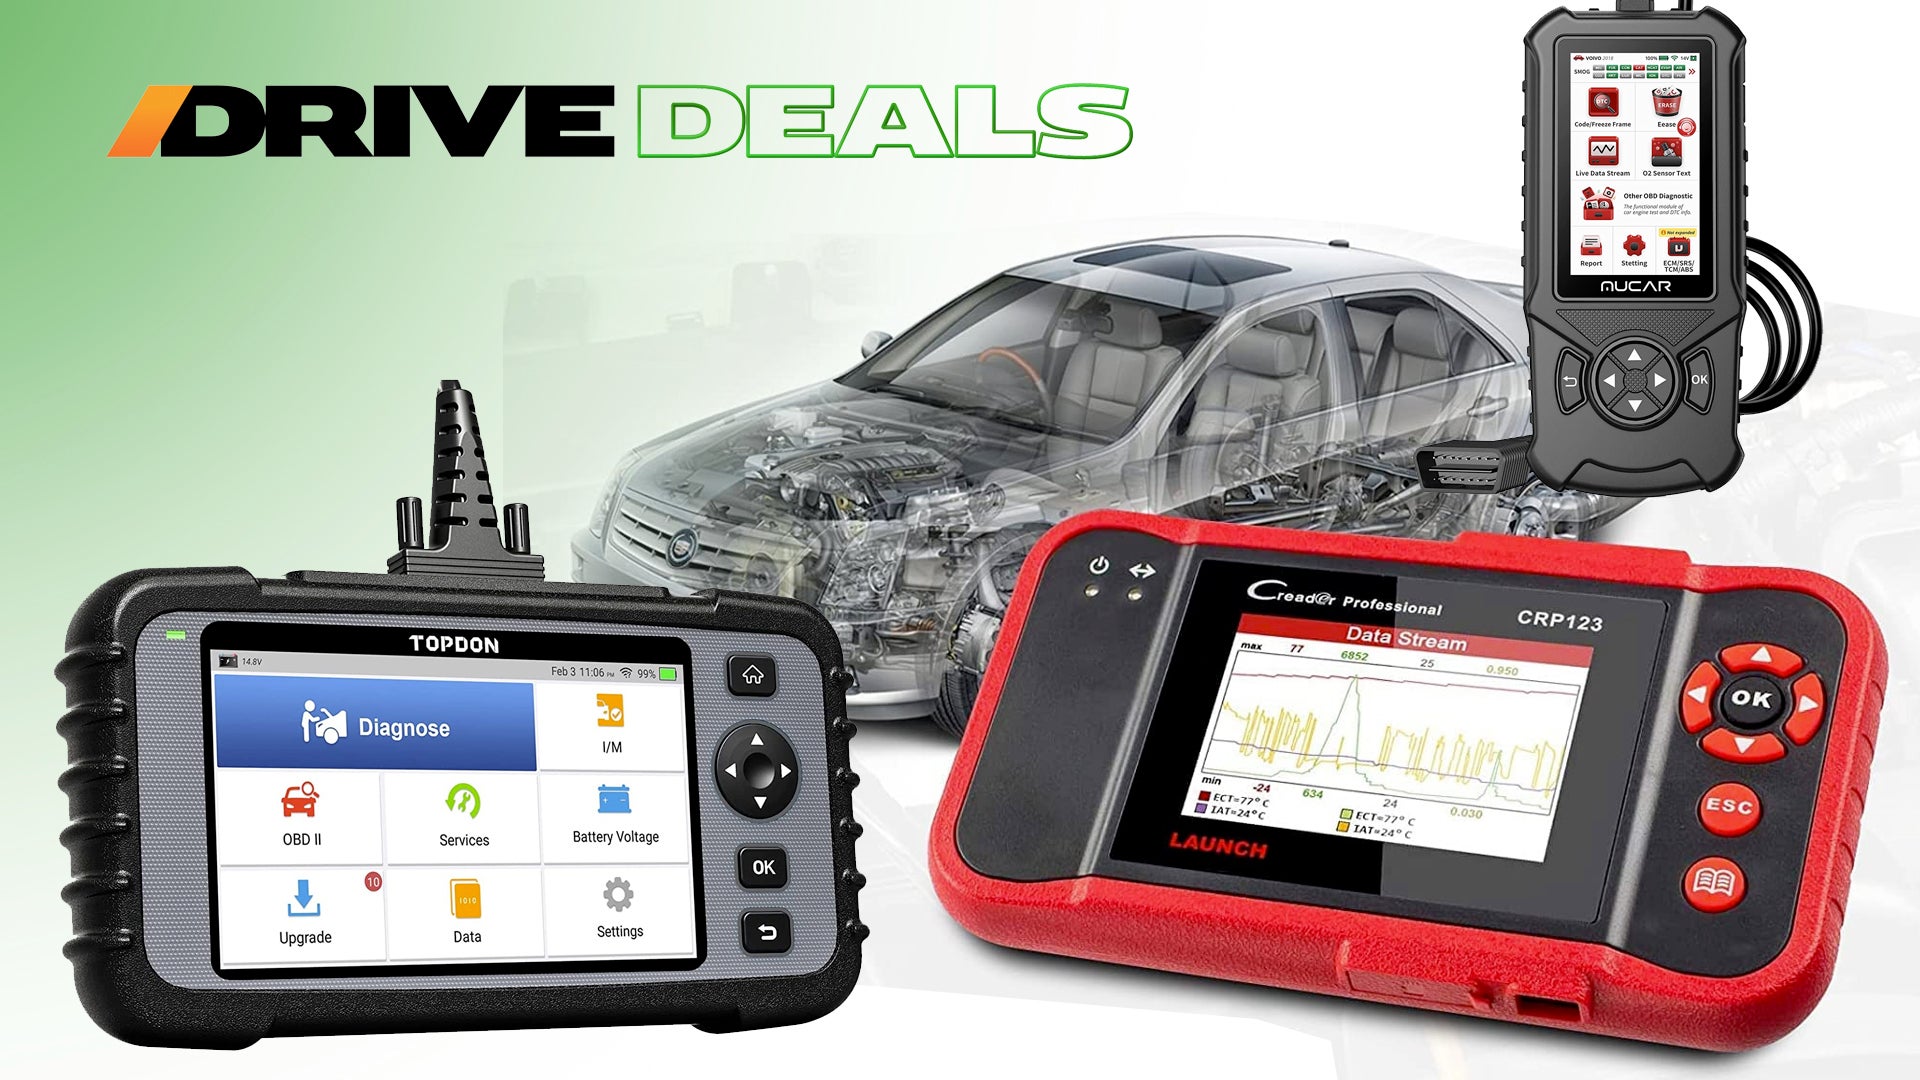 A Big Range of OBD Scanners Are Deeply Discounted on Amazon Right Now